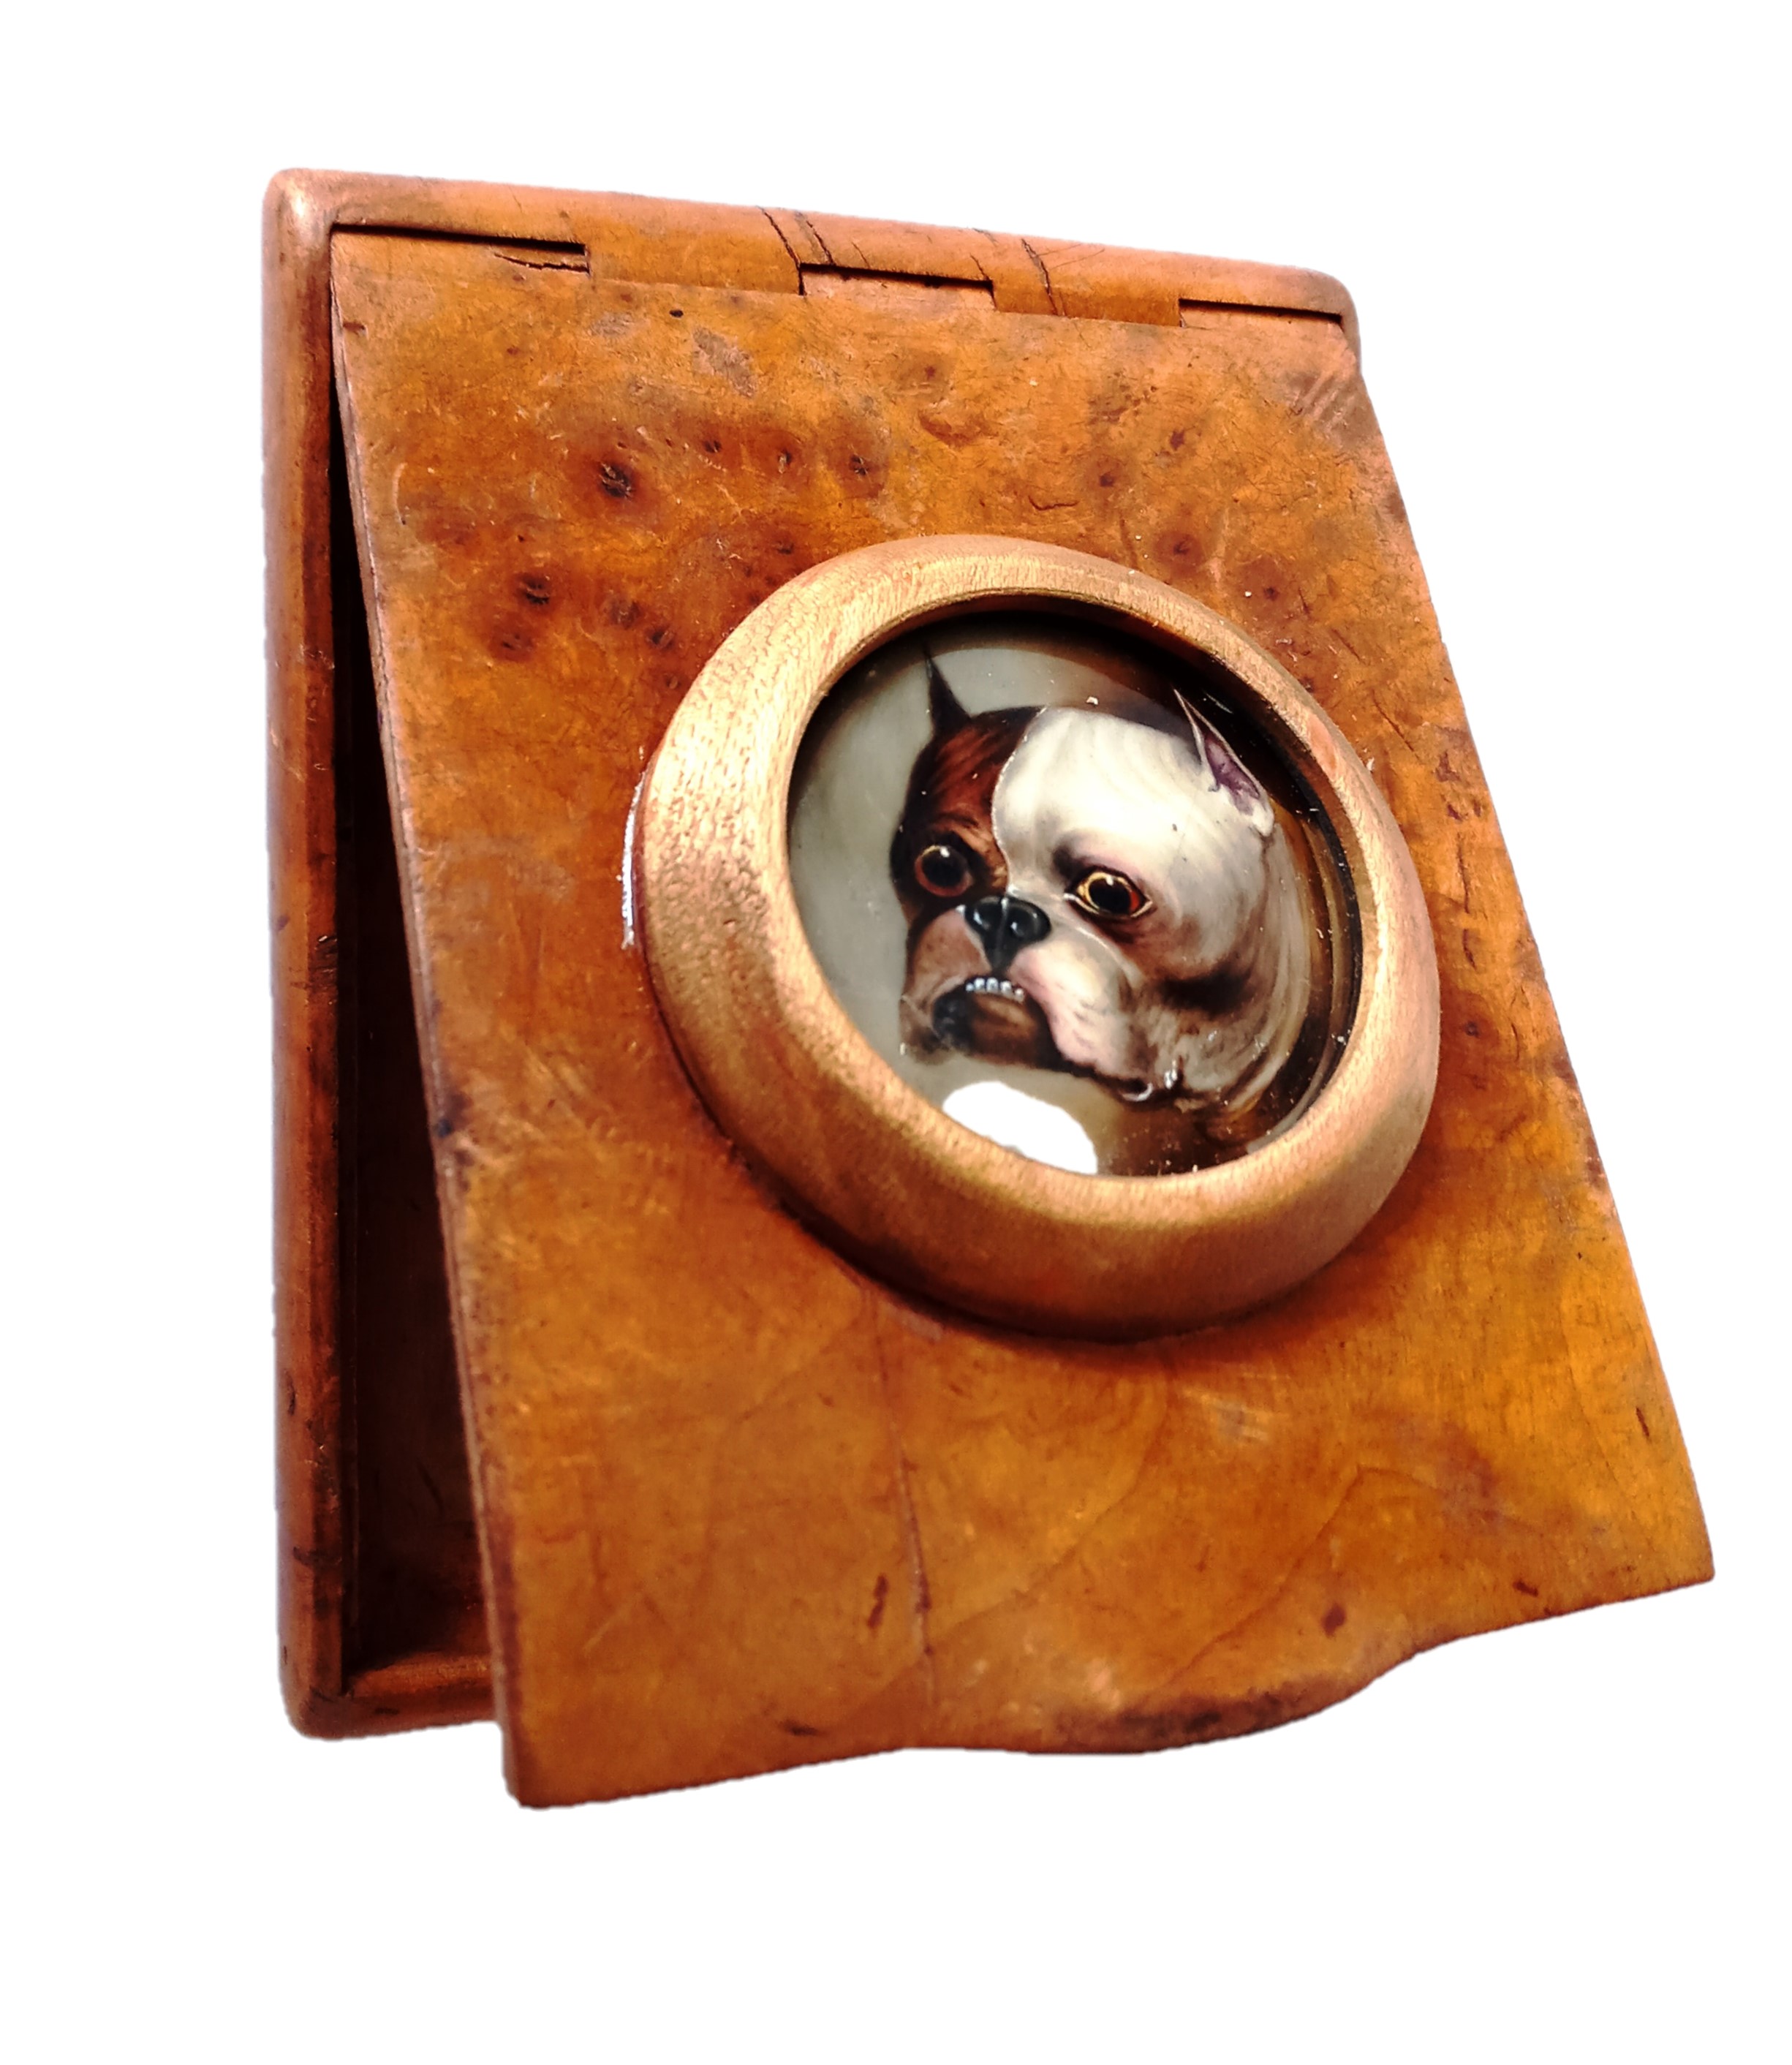 Miniature Enamel Mounting 1603 - Click for details